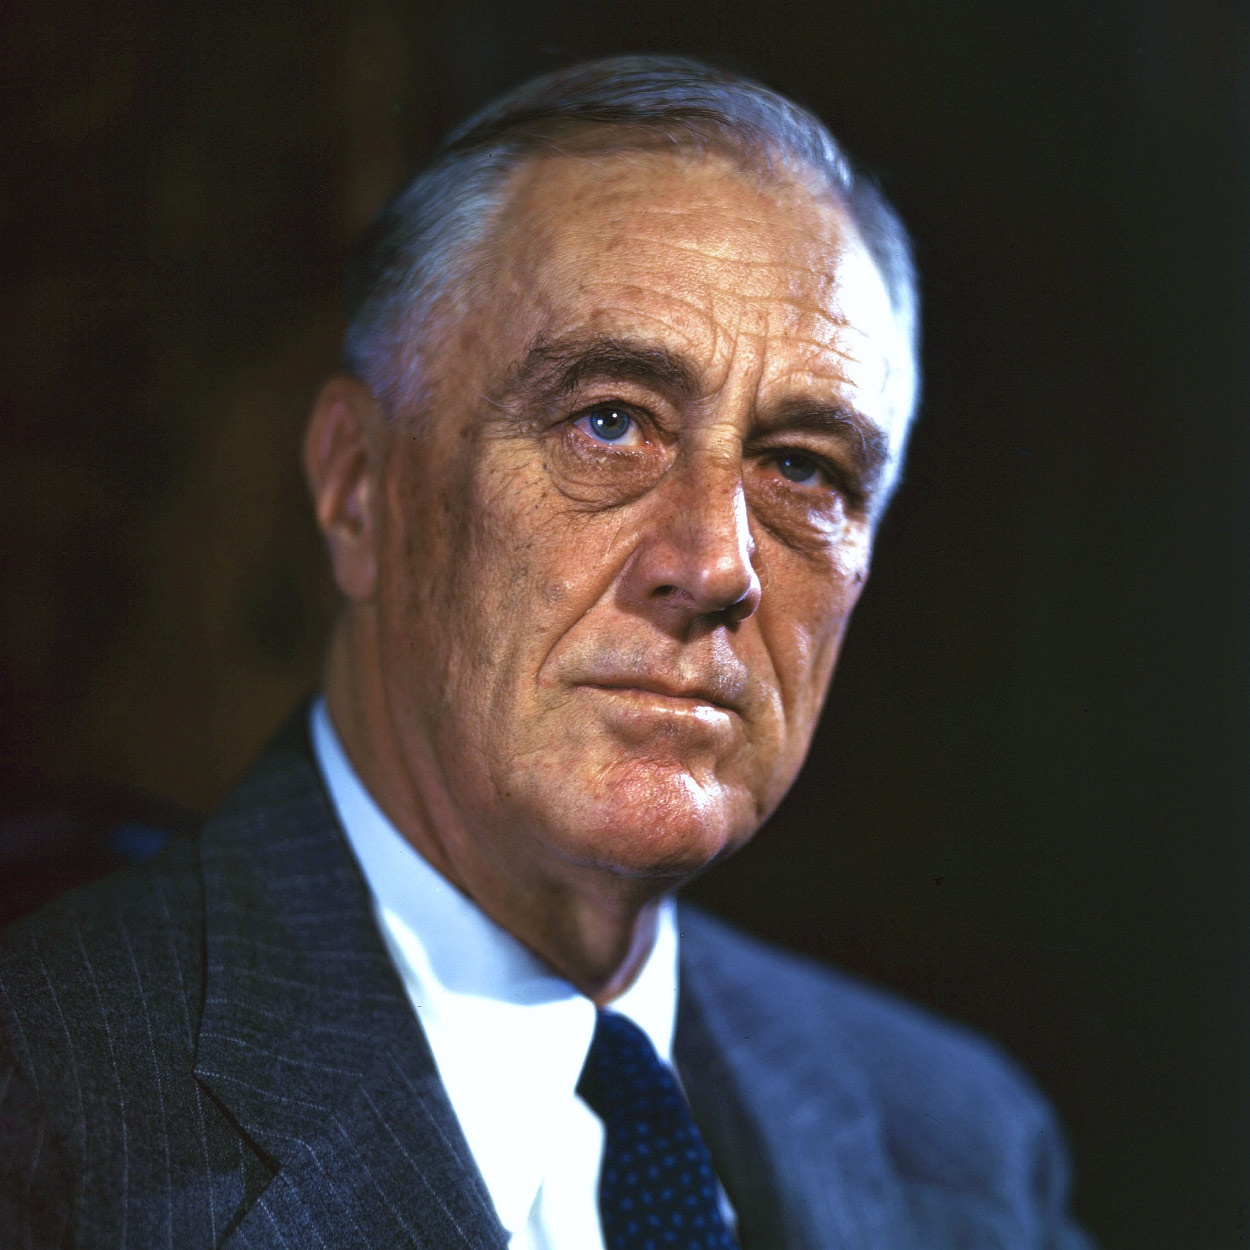 Portrait of Franklin D. Roosevelt, the 32nd President of the United States